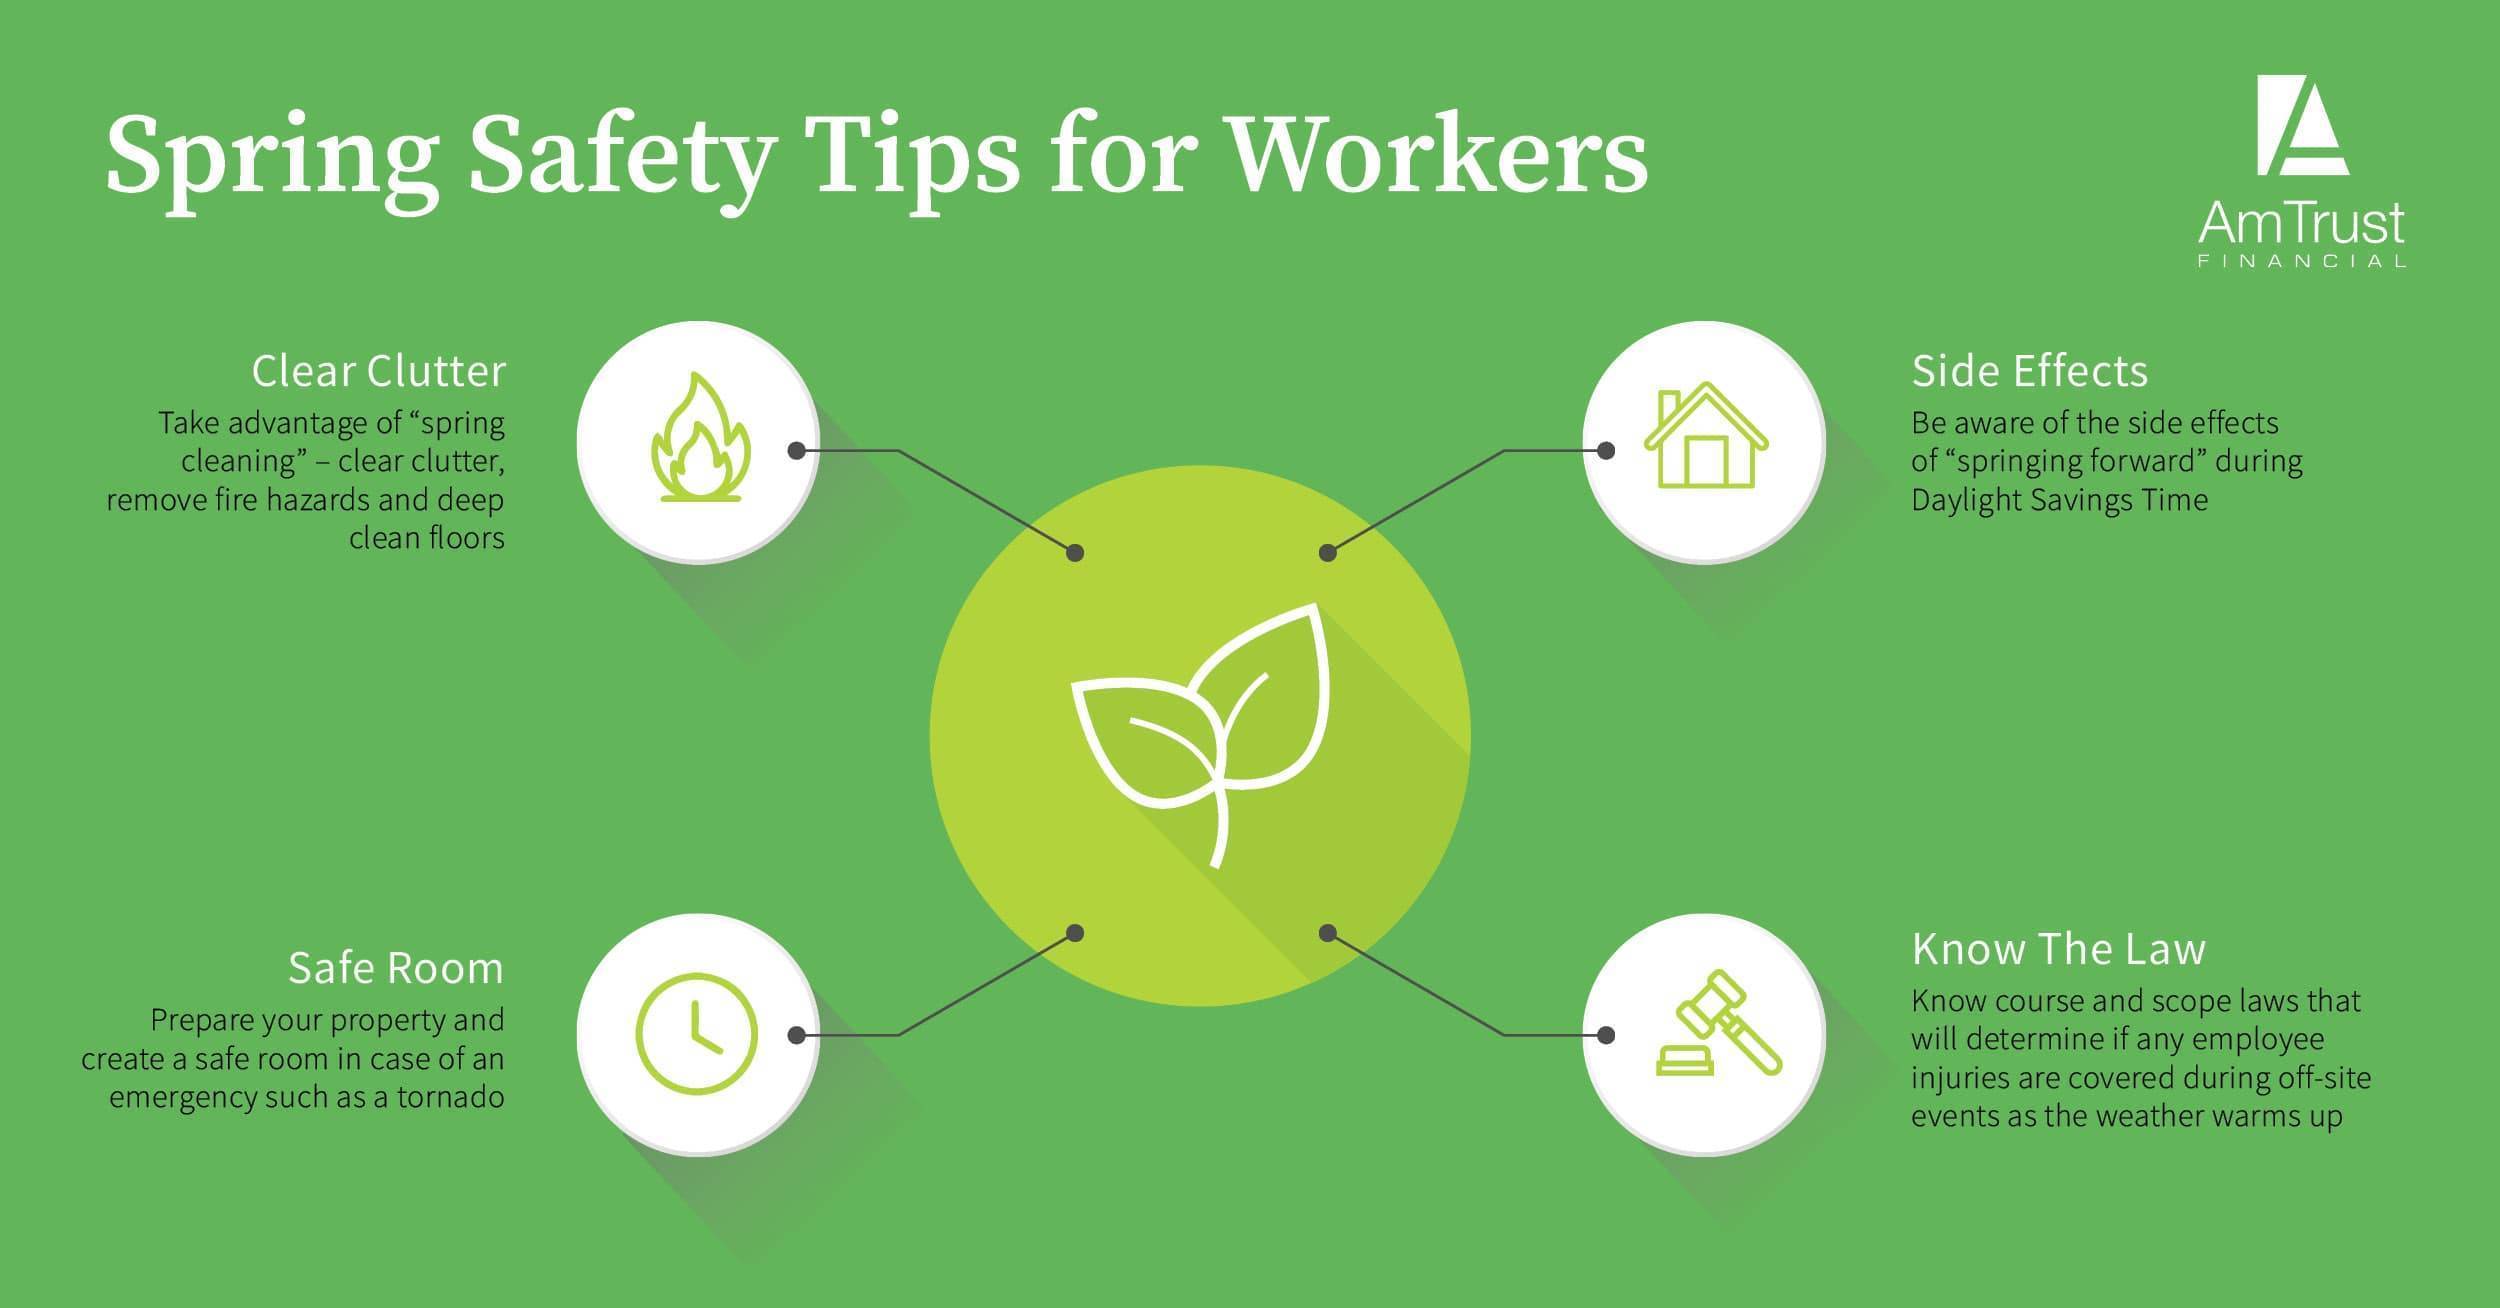 22 Worker Safety Tips AmTrust Insurance